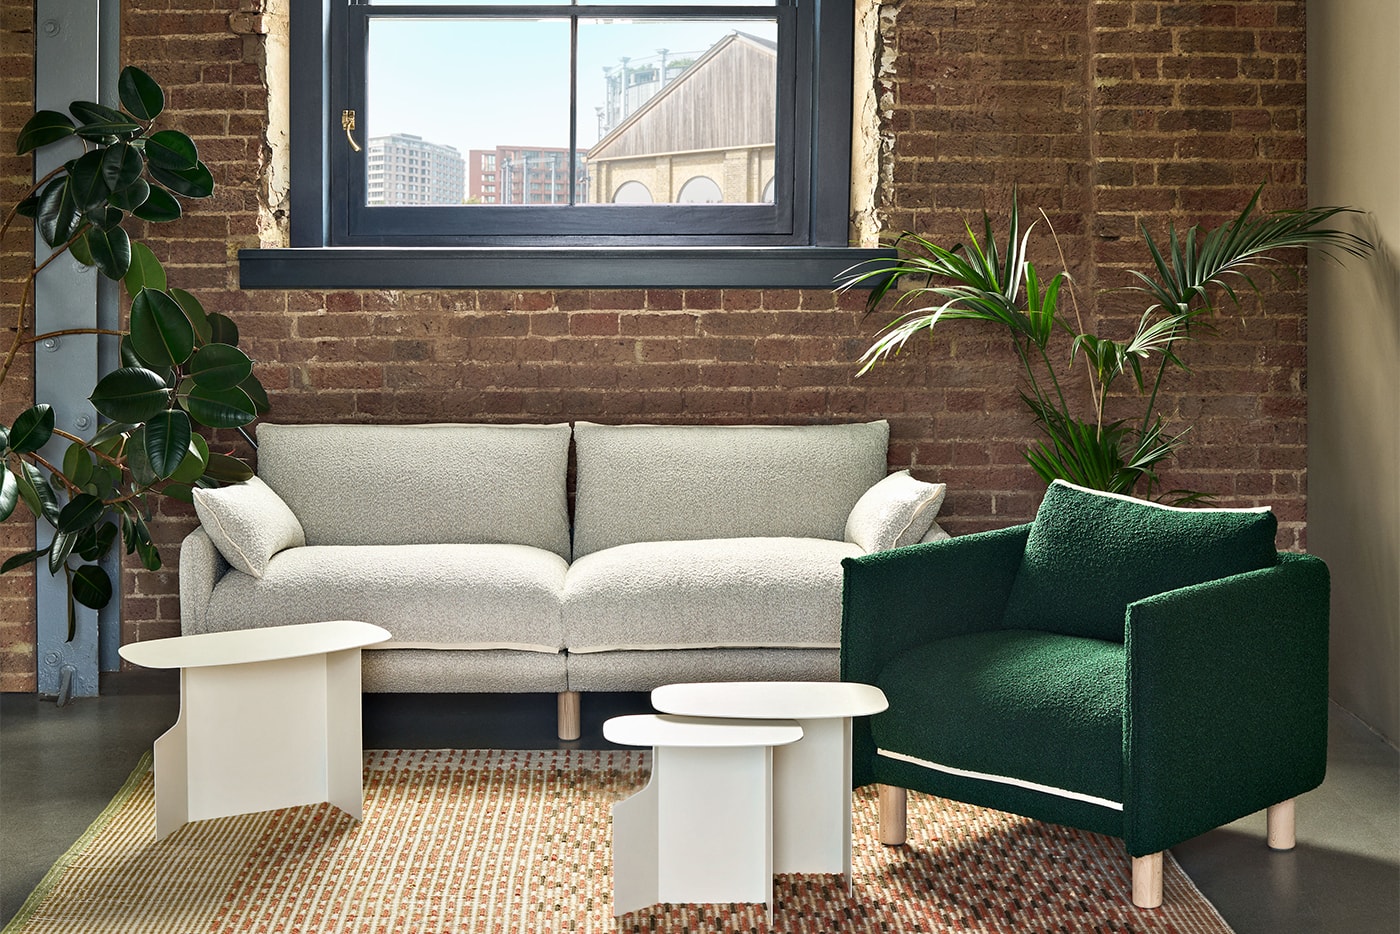 Cozmo Launches New Furniture Designed by Raw Edges